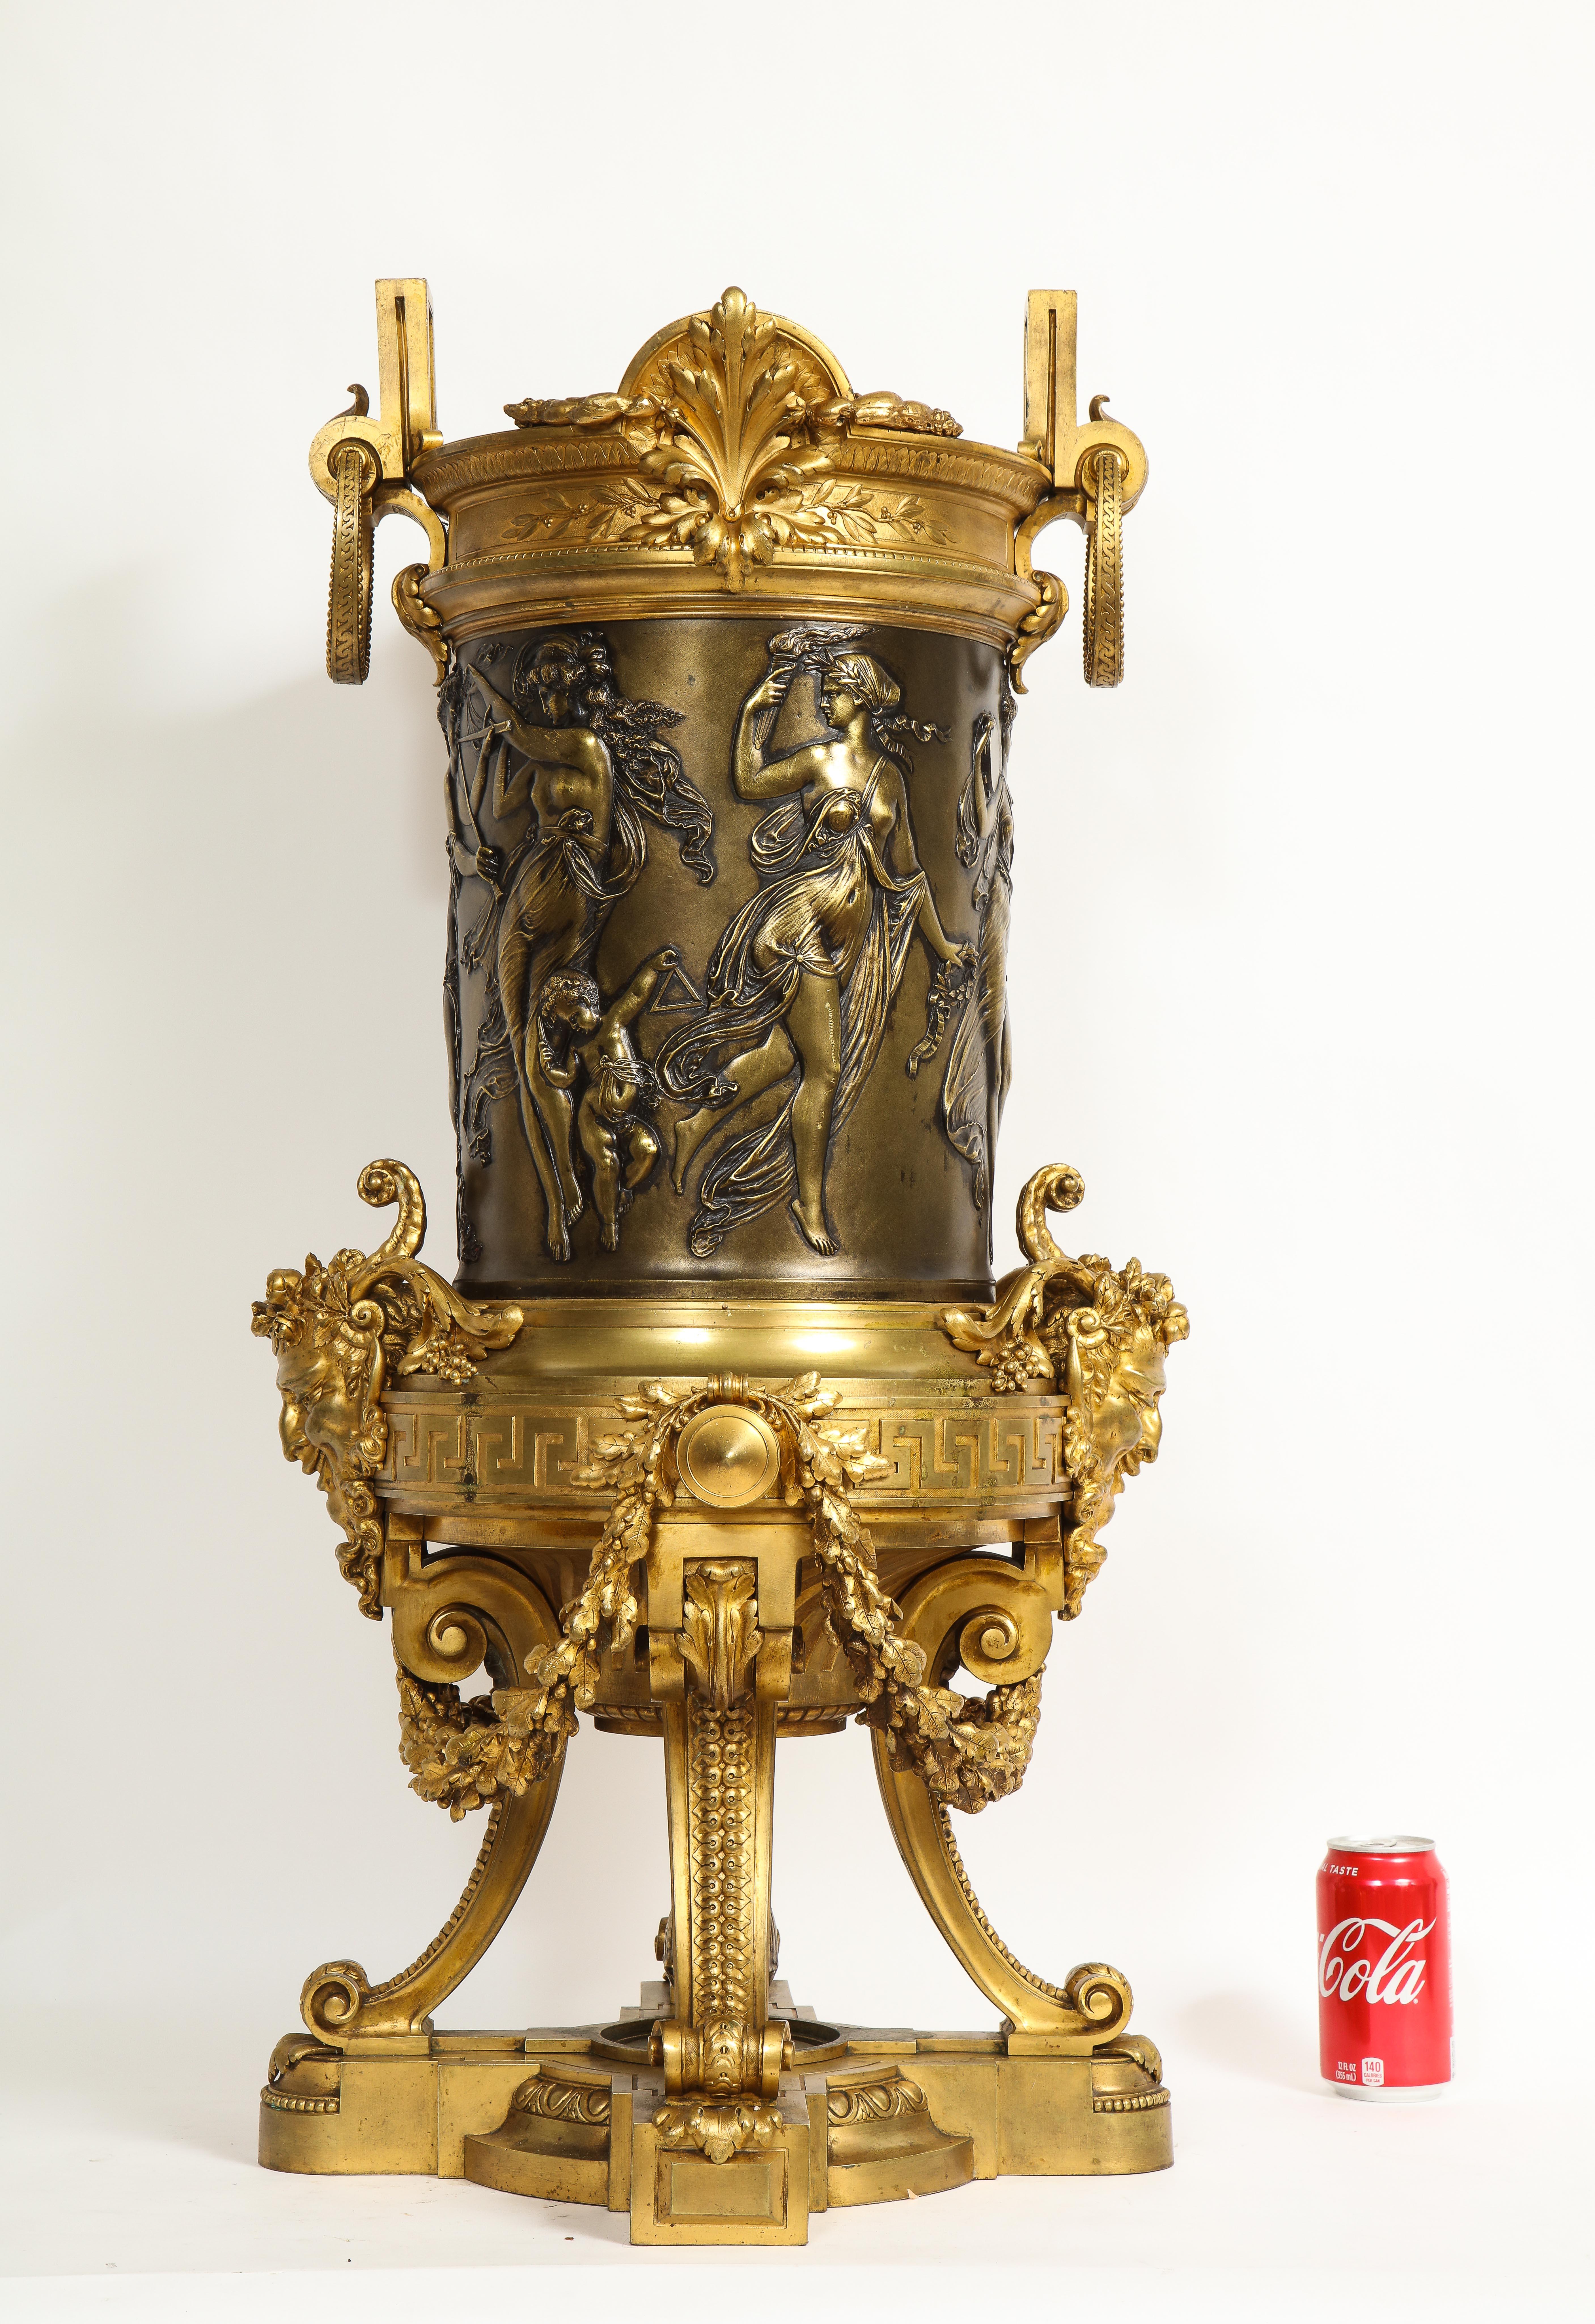 A Magnificent and Large 19th Century French Louis XVI Style Patinated and Doré Bronze Jardinière/Planter, Attributed to F. Barbedienne  The large and imposing piece features a regal rim adorned with stylized ferns made of doré bronze, which are